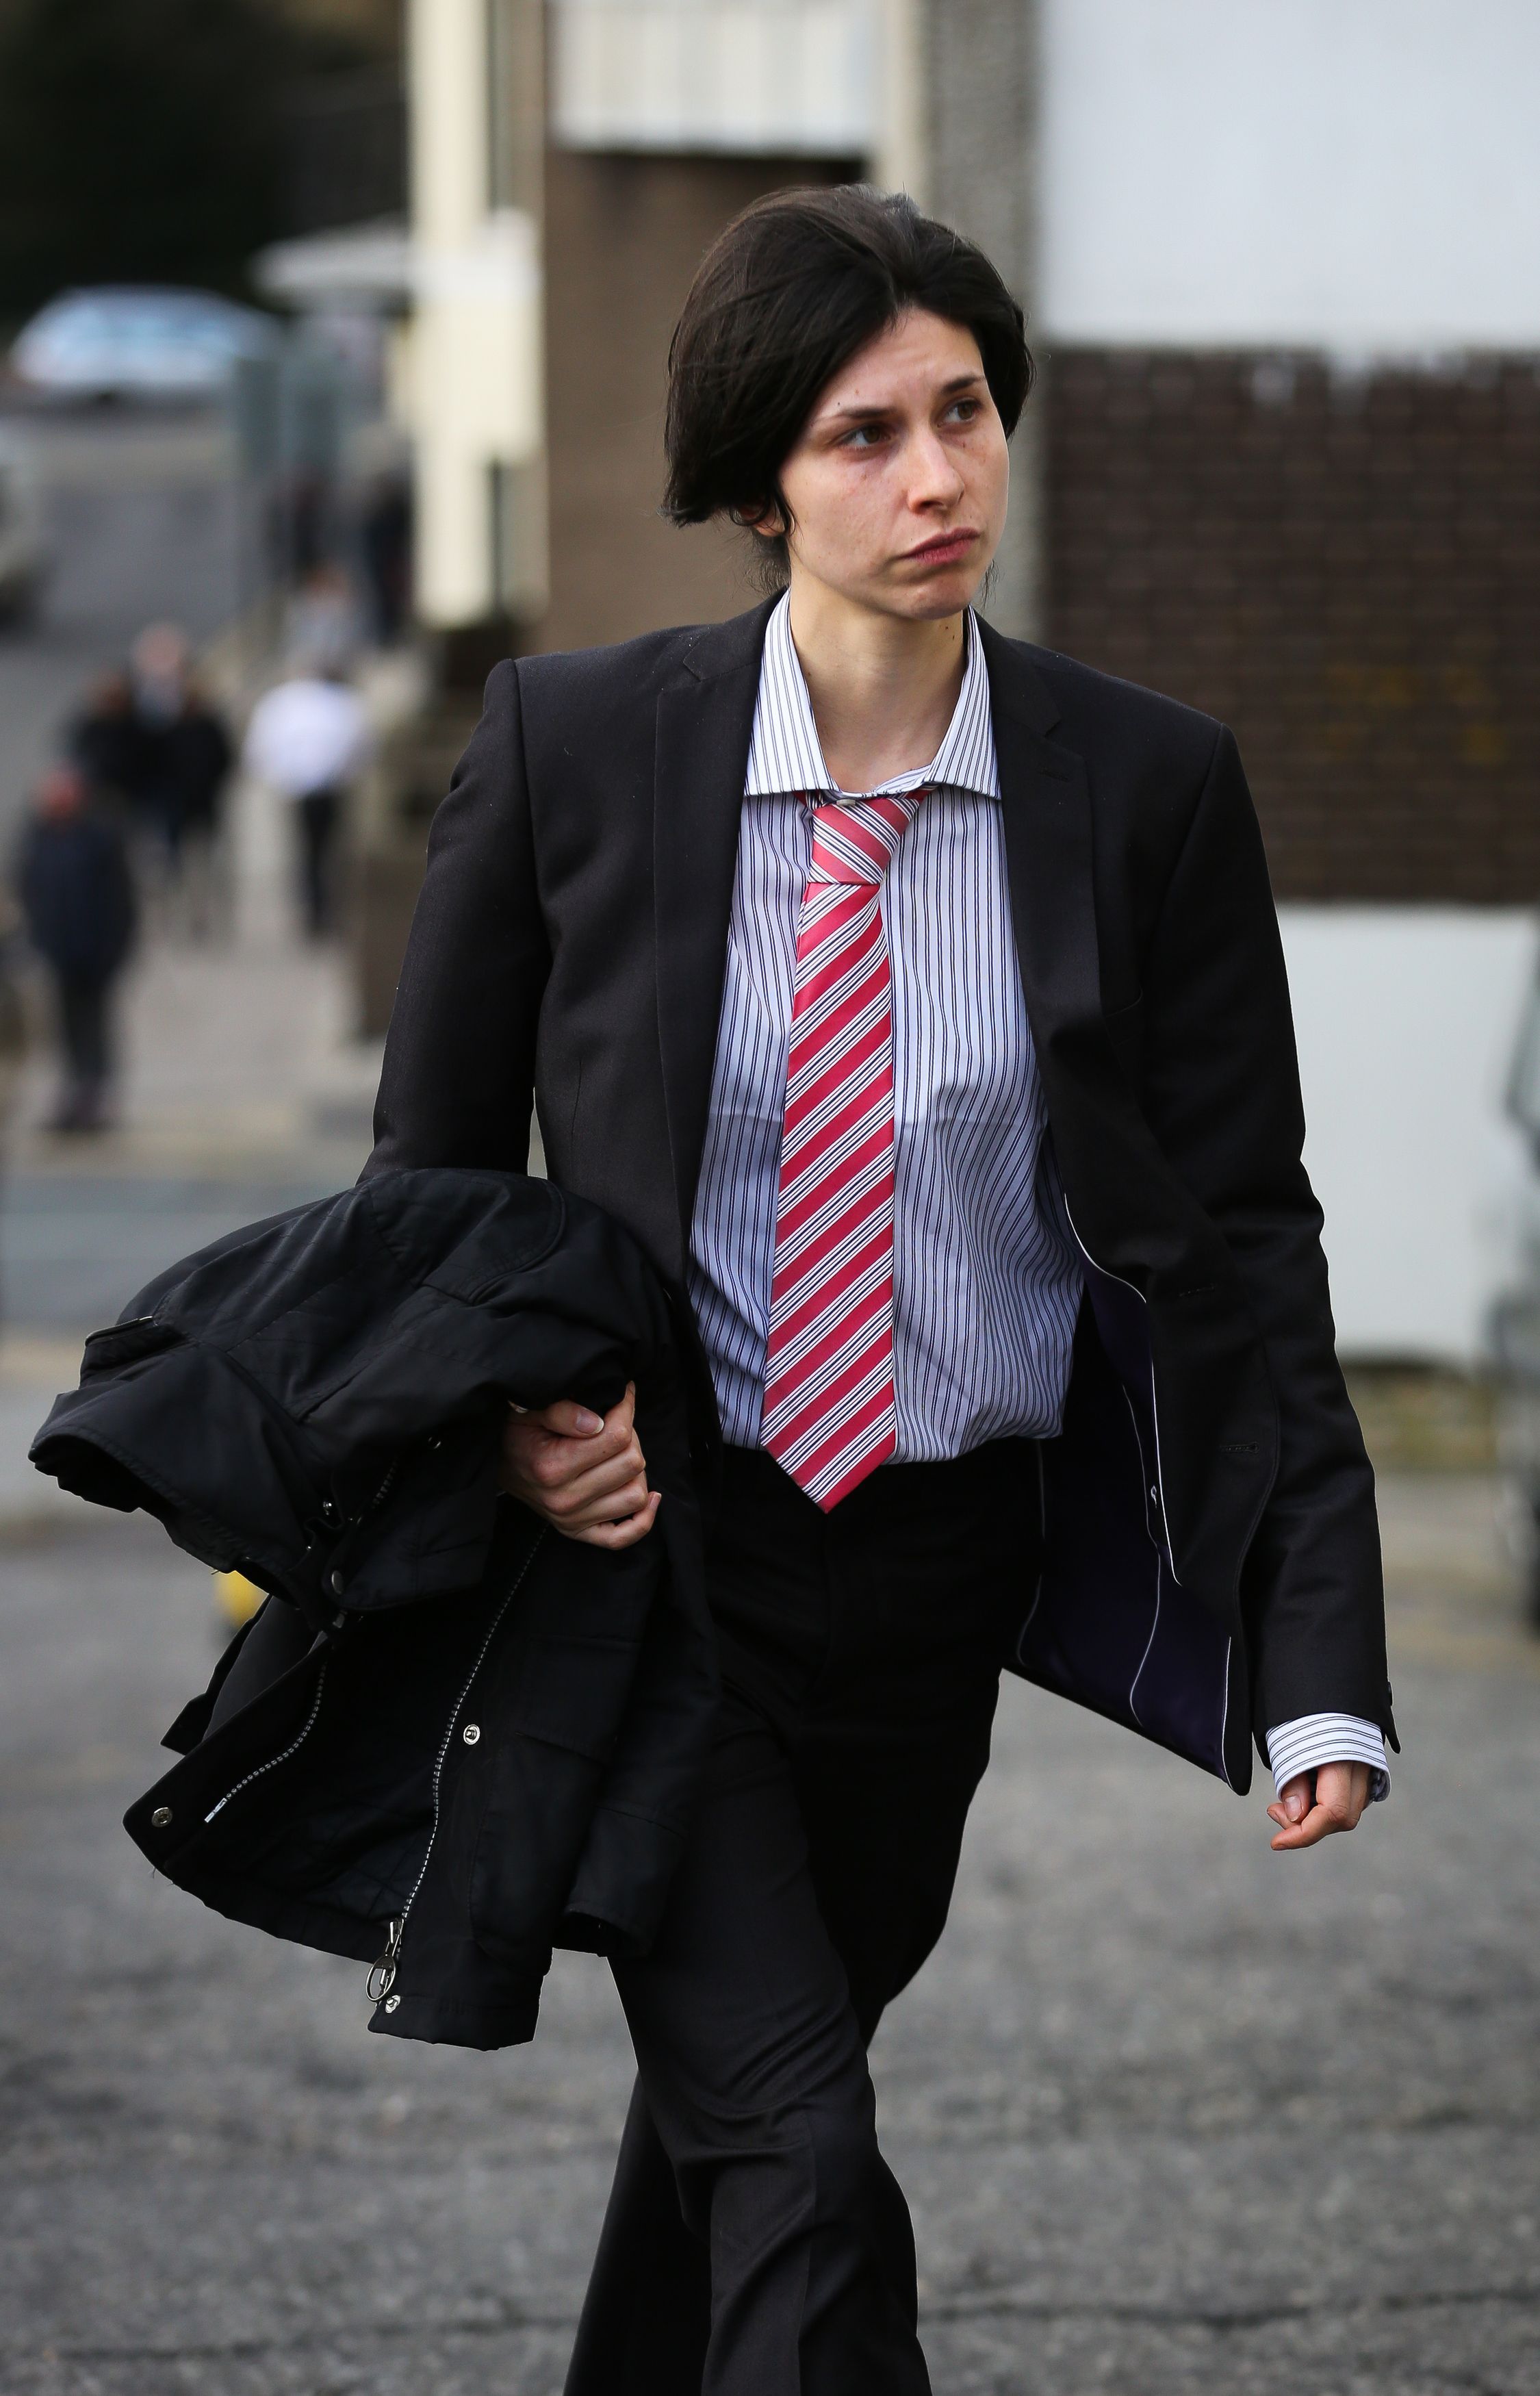 Natalie Hynde, daughter of Chrissie Hynde and Ray Davies, arrives at Brighton Magistrates Court in Brighton, East Sussex in August 2013. | Source: Getty Images